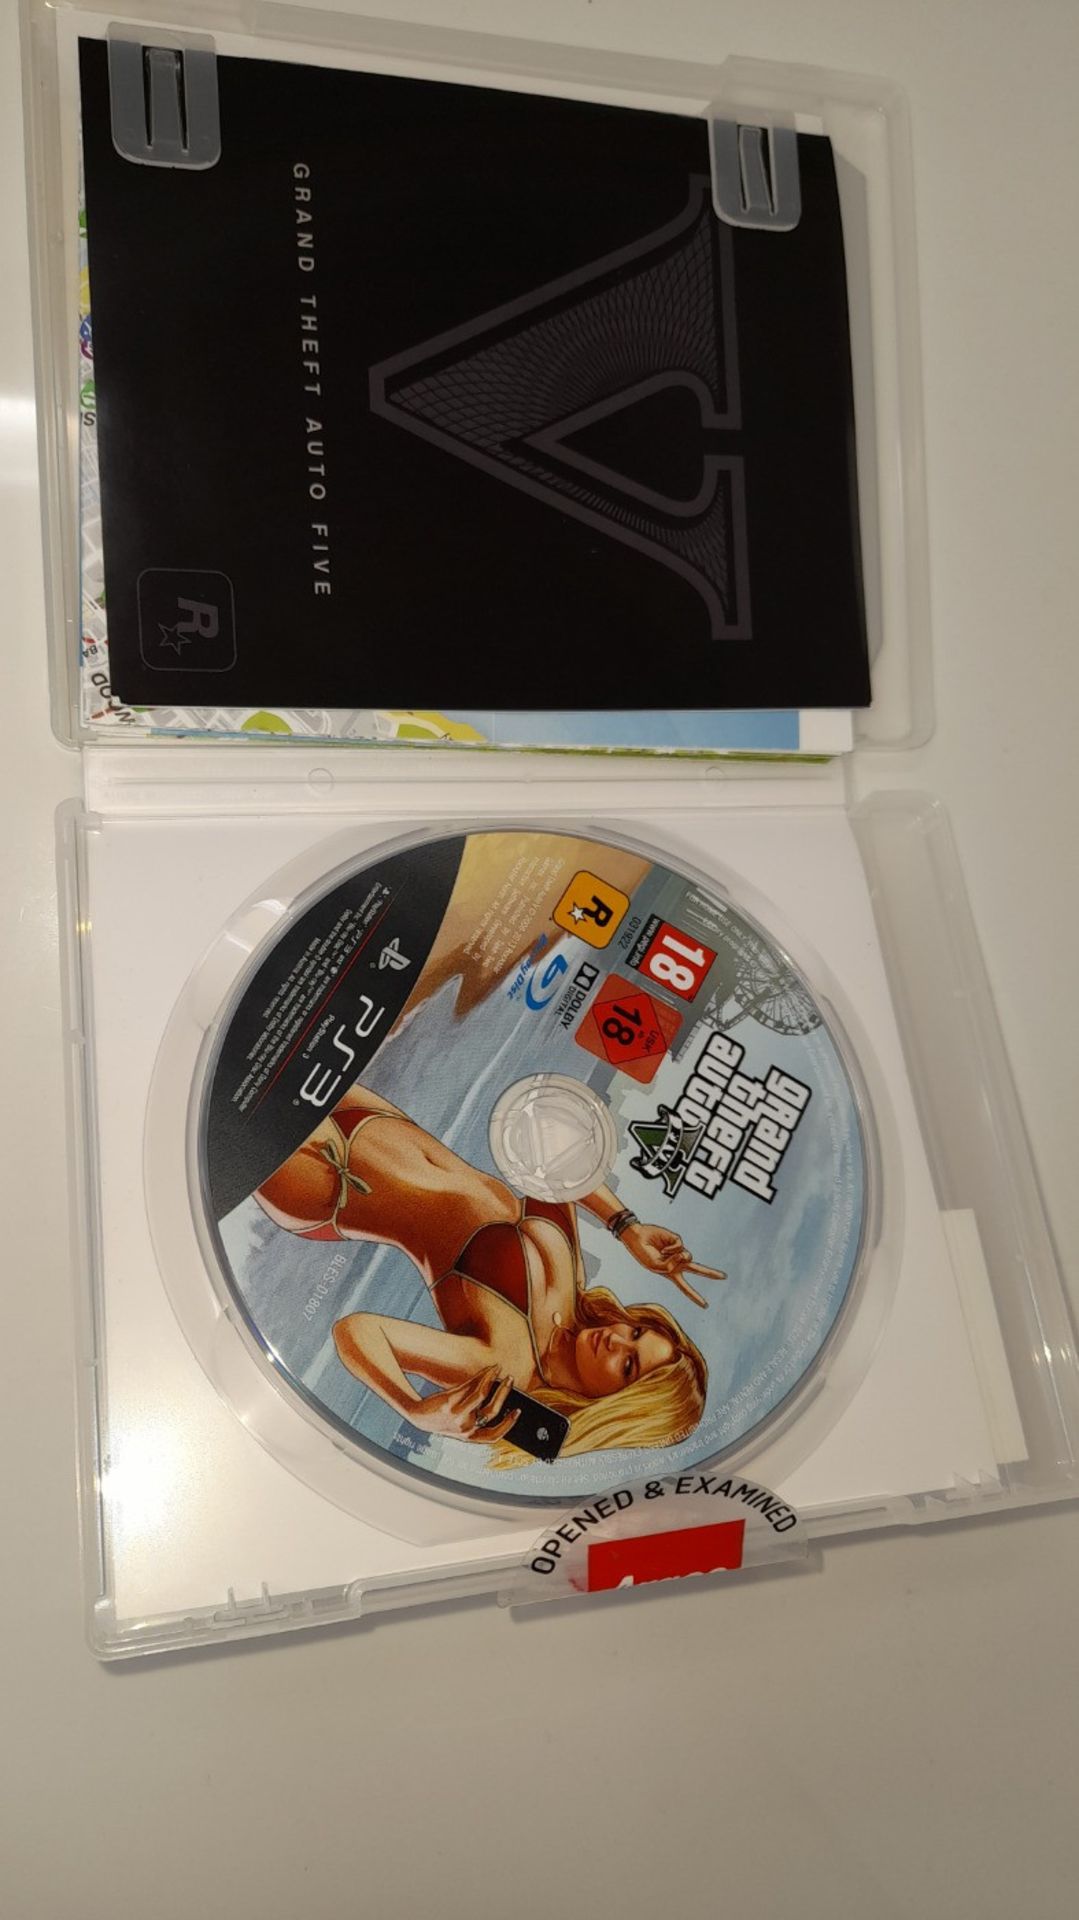 Grand Theft Auto V (PS3 - Image 3 of 3